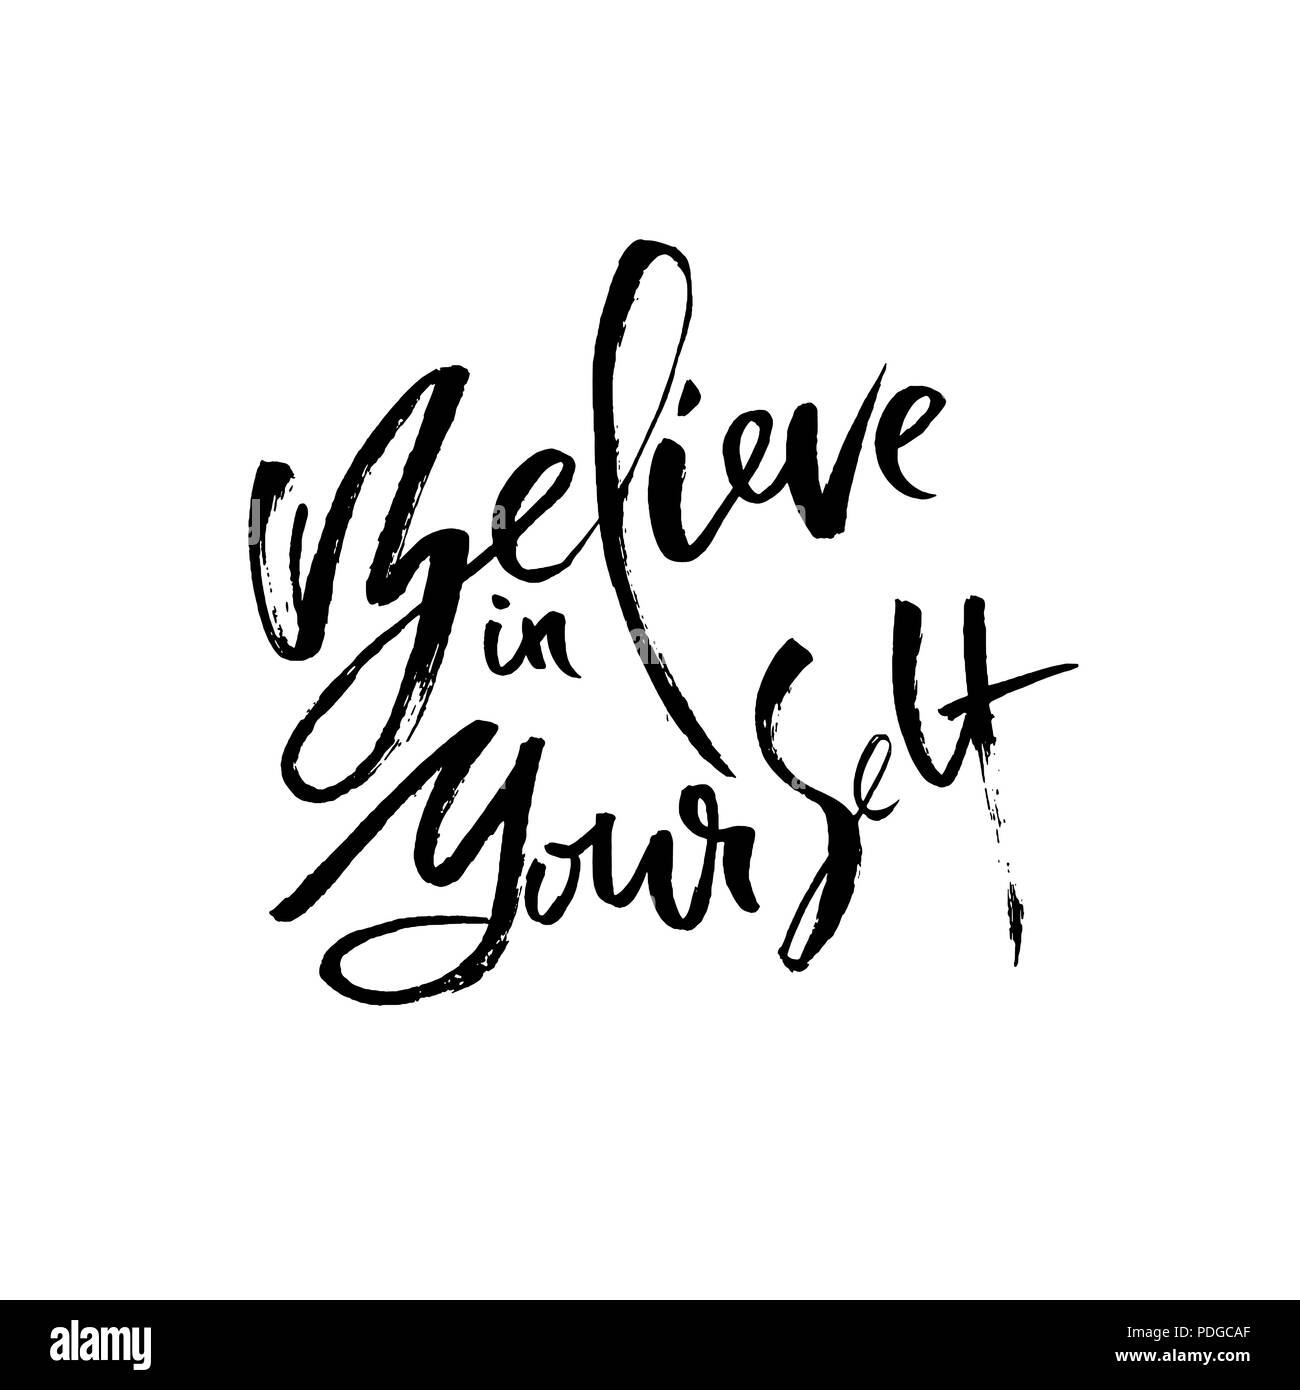 Believe in yourself Black and White Stock Photos & Images - Alamy